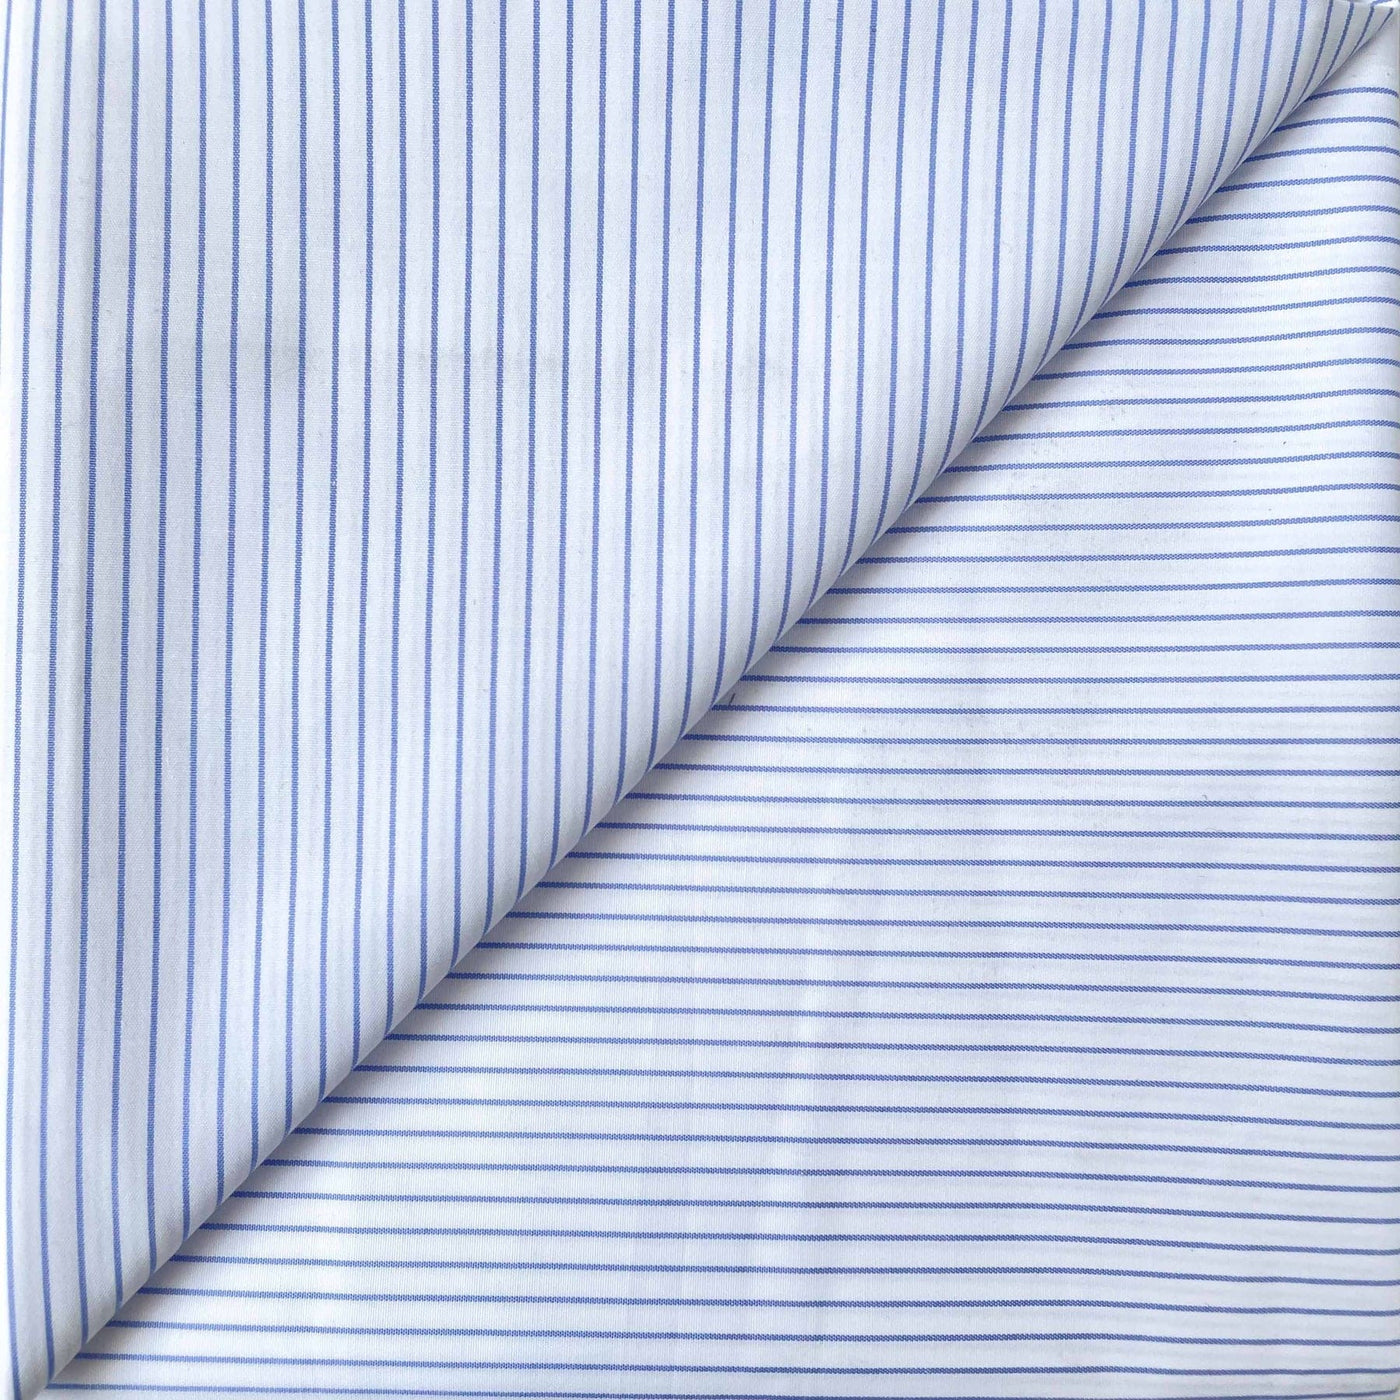 Fabric Pandit Fabric Men's White & Light Blue Stripes Pattern Pure Cotton Shirting Fabric (Width 58 Inches)